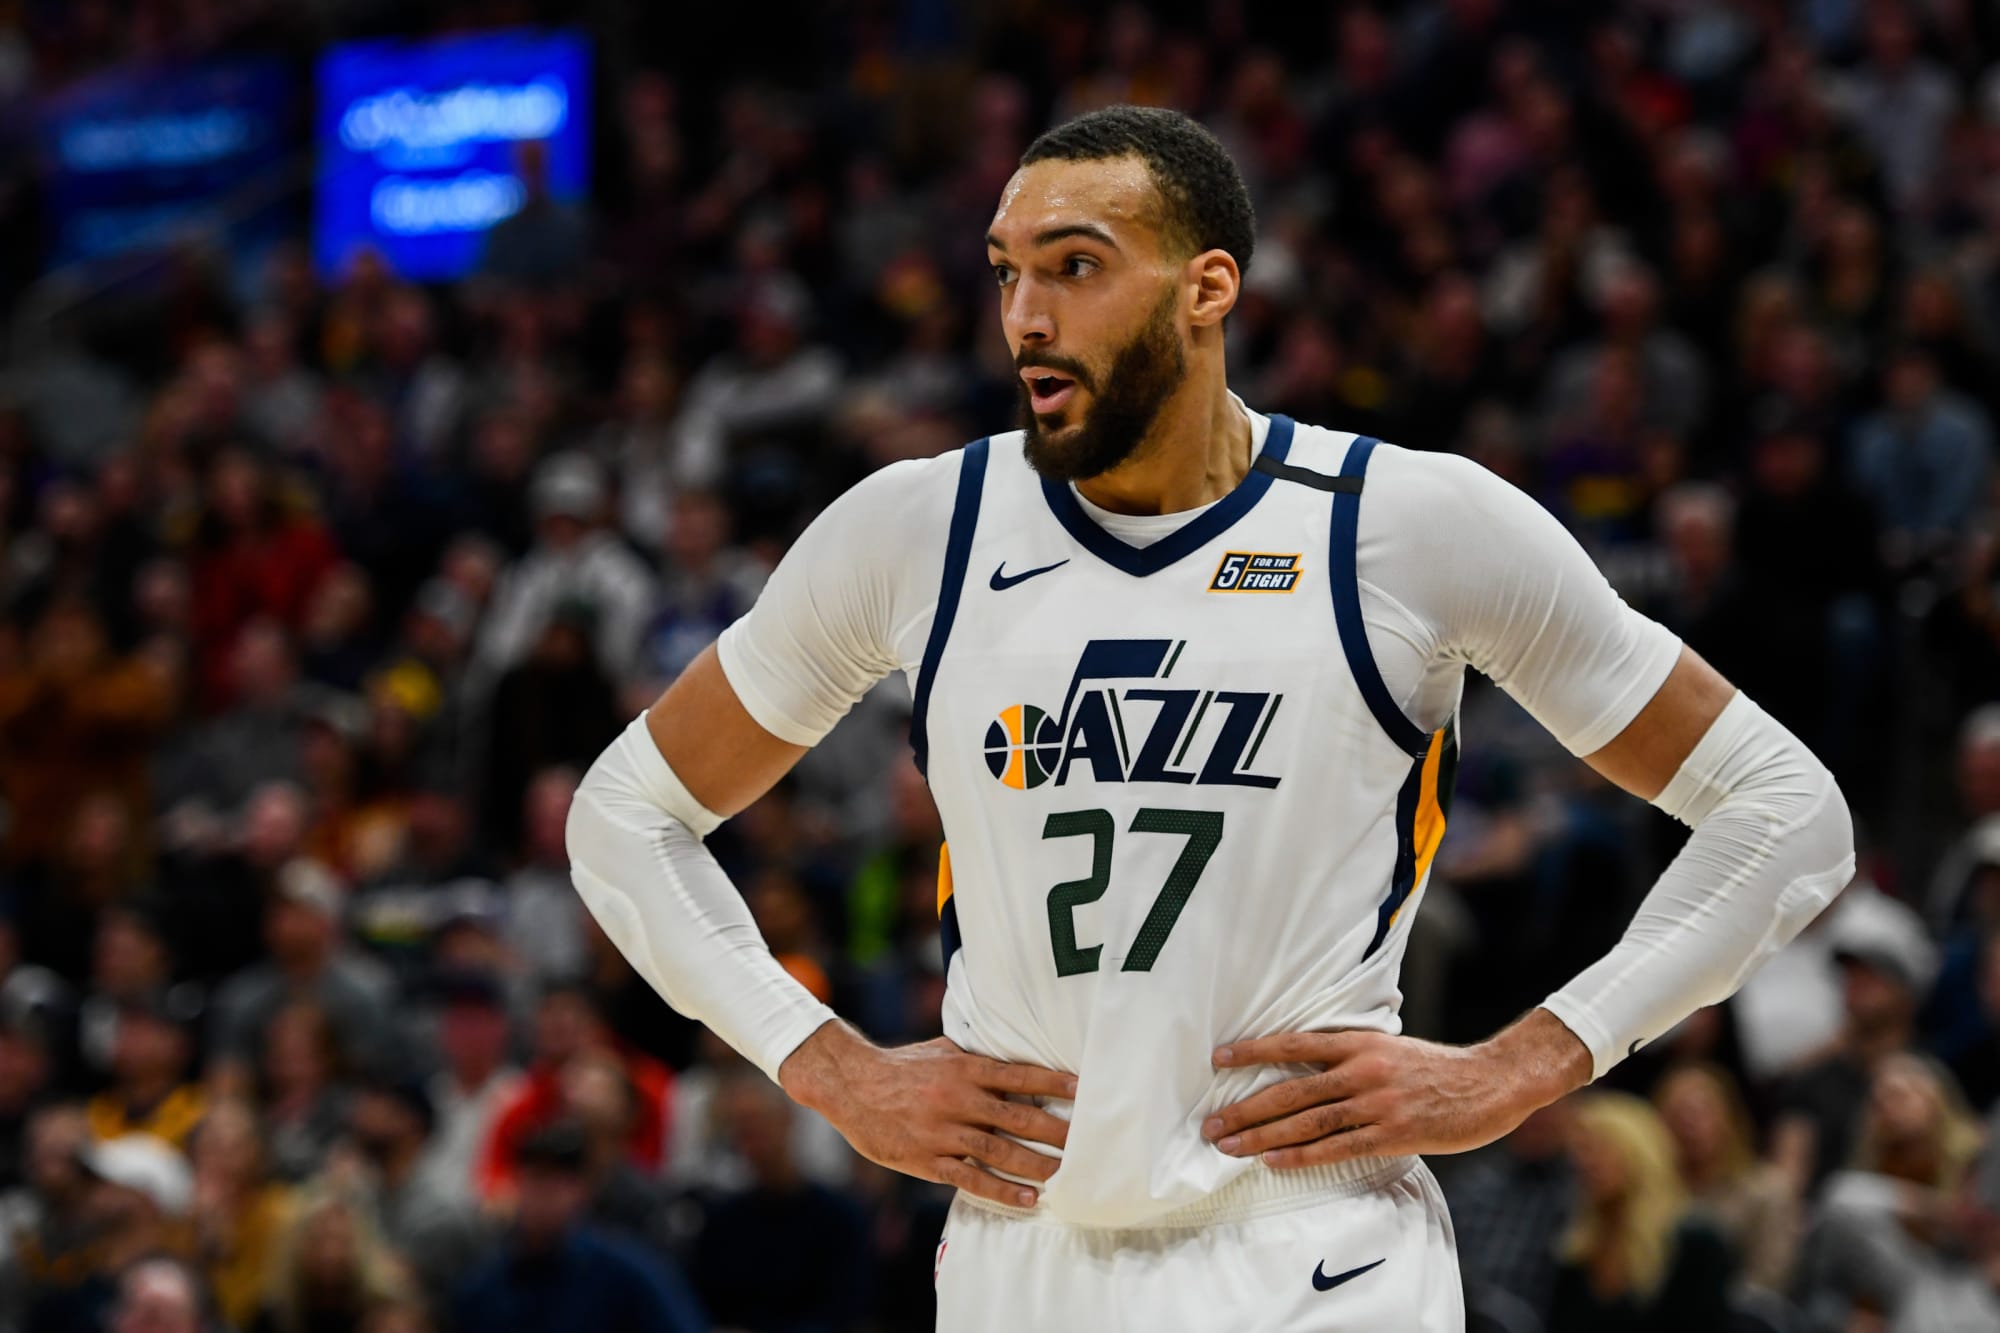 Utah Jazz: Rudy Gobert's All-Star case is clear as day